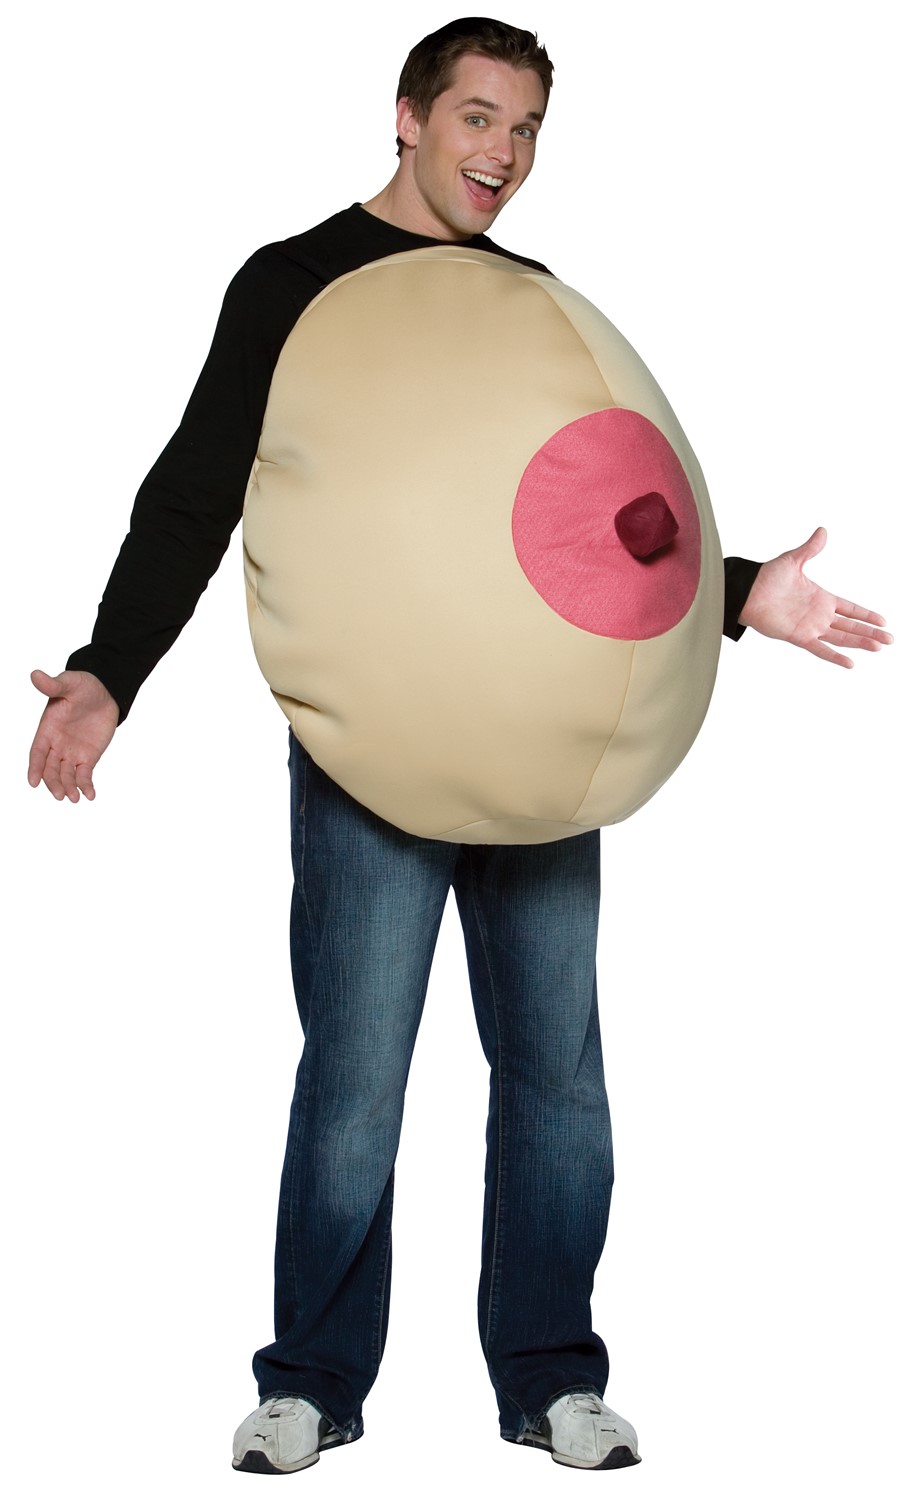 Funny halloween costume big boobs Rasta Imposta Giant Boob With Squeaky Nipple Costume Adult One Size For Men And Women Adult Sized Silly Funny Humorous Costume Dress Outfit For Halloween Events R Rated X Rated College Humor Over 21